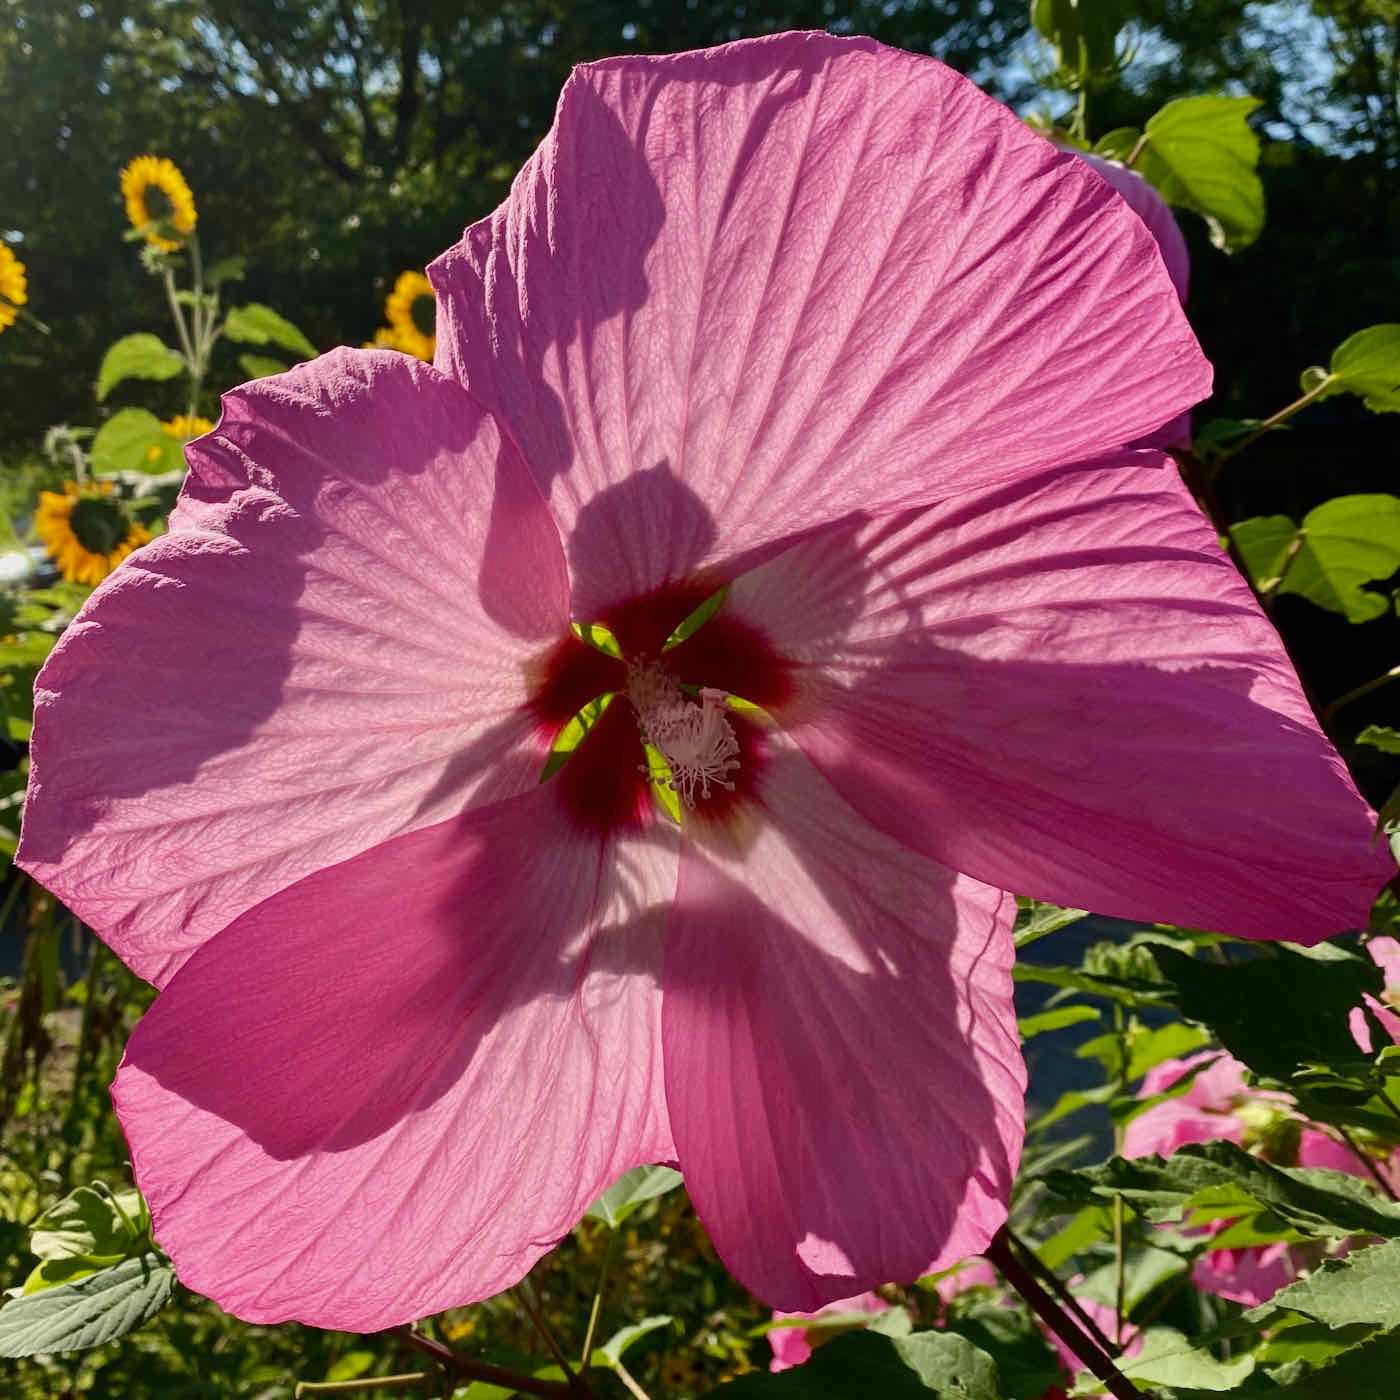 Giant pink hibiscus blossom